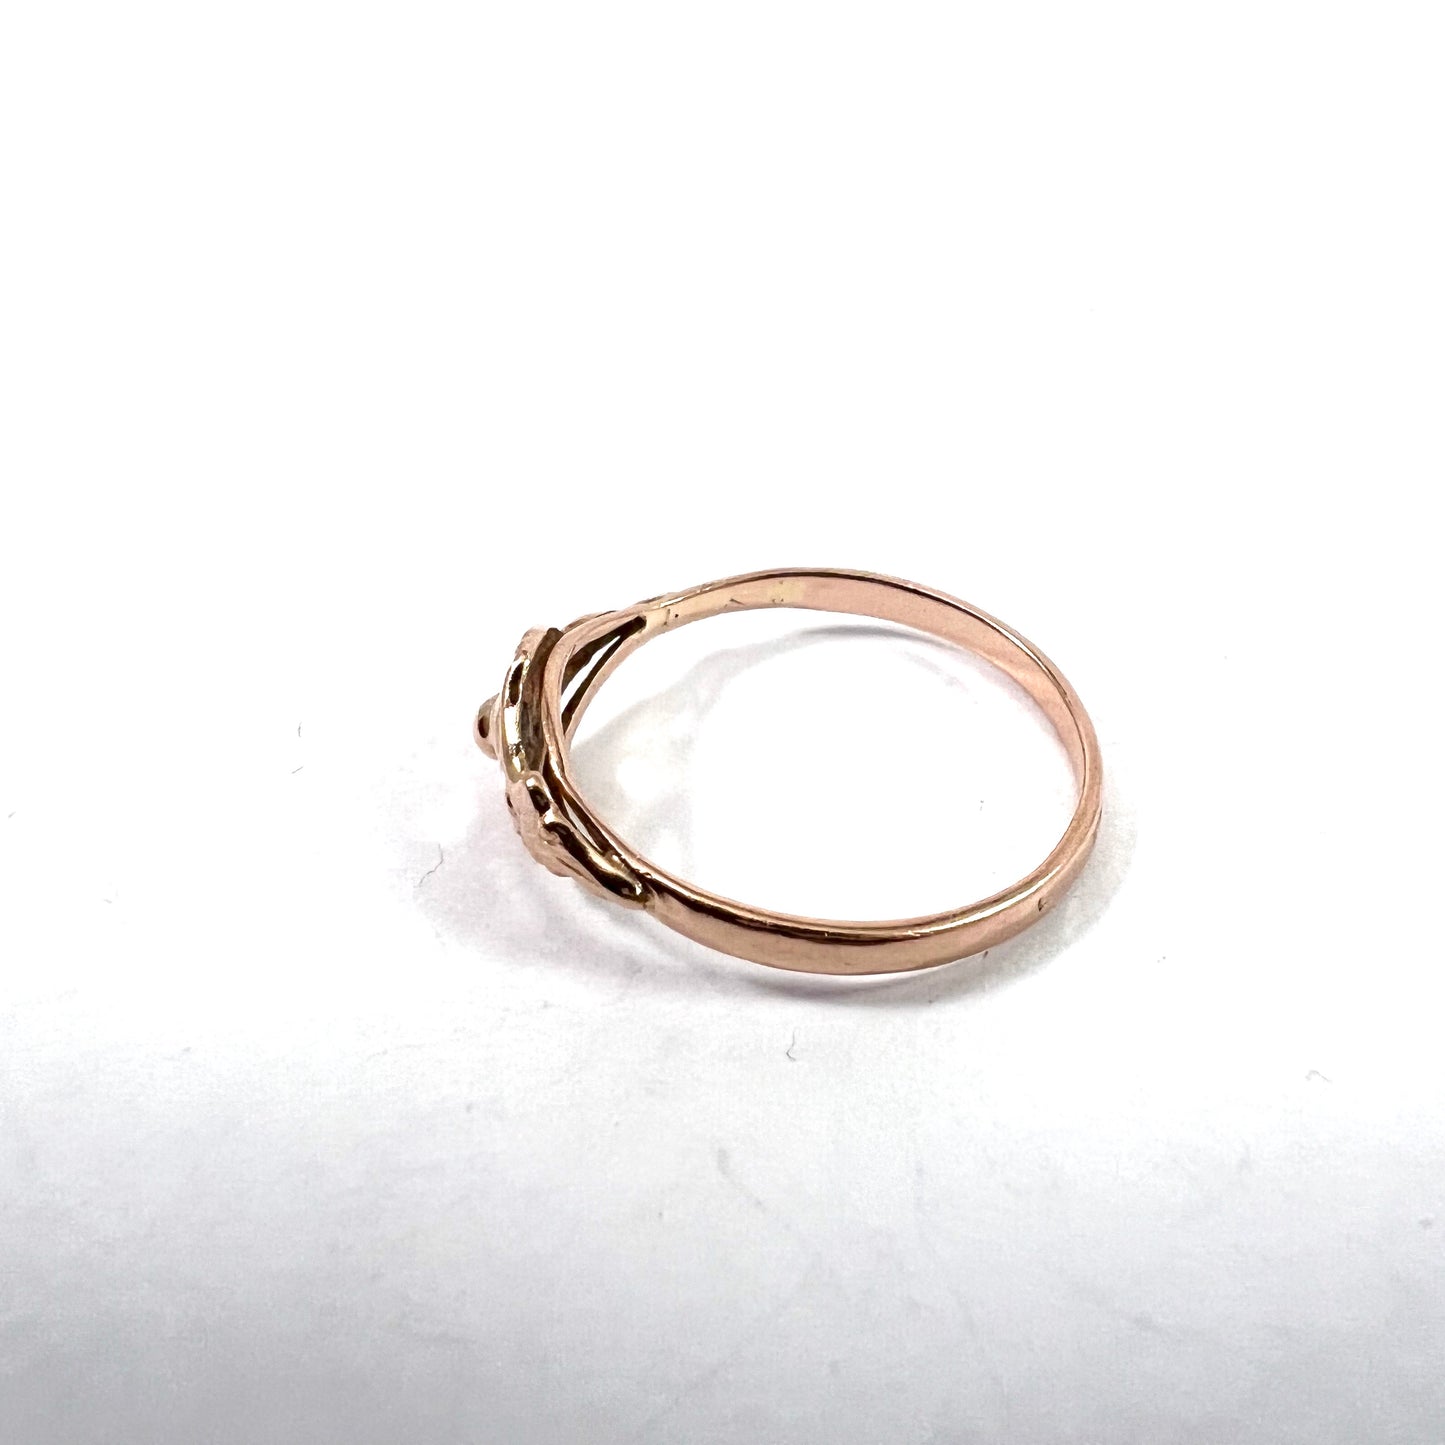 Early 1900s. Art Nouveau 14k Gold Ring.